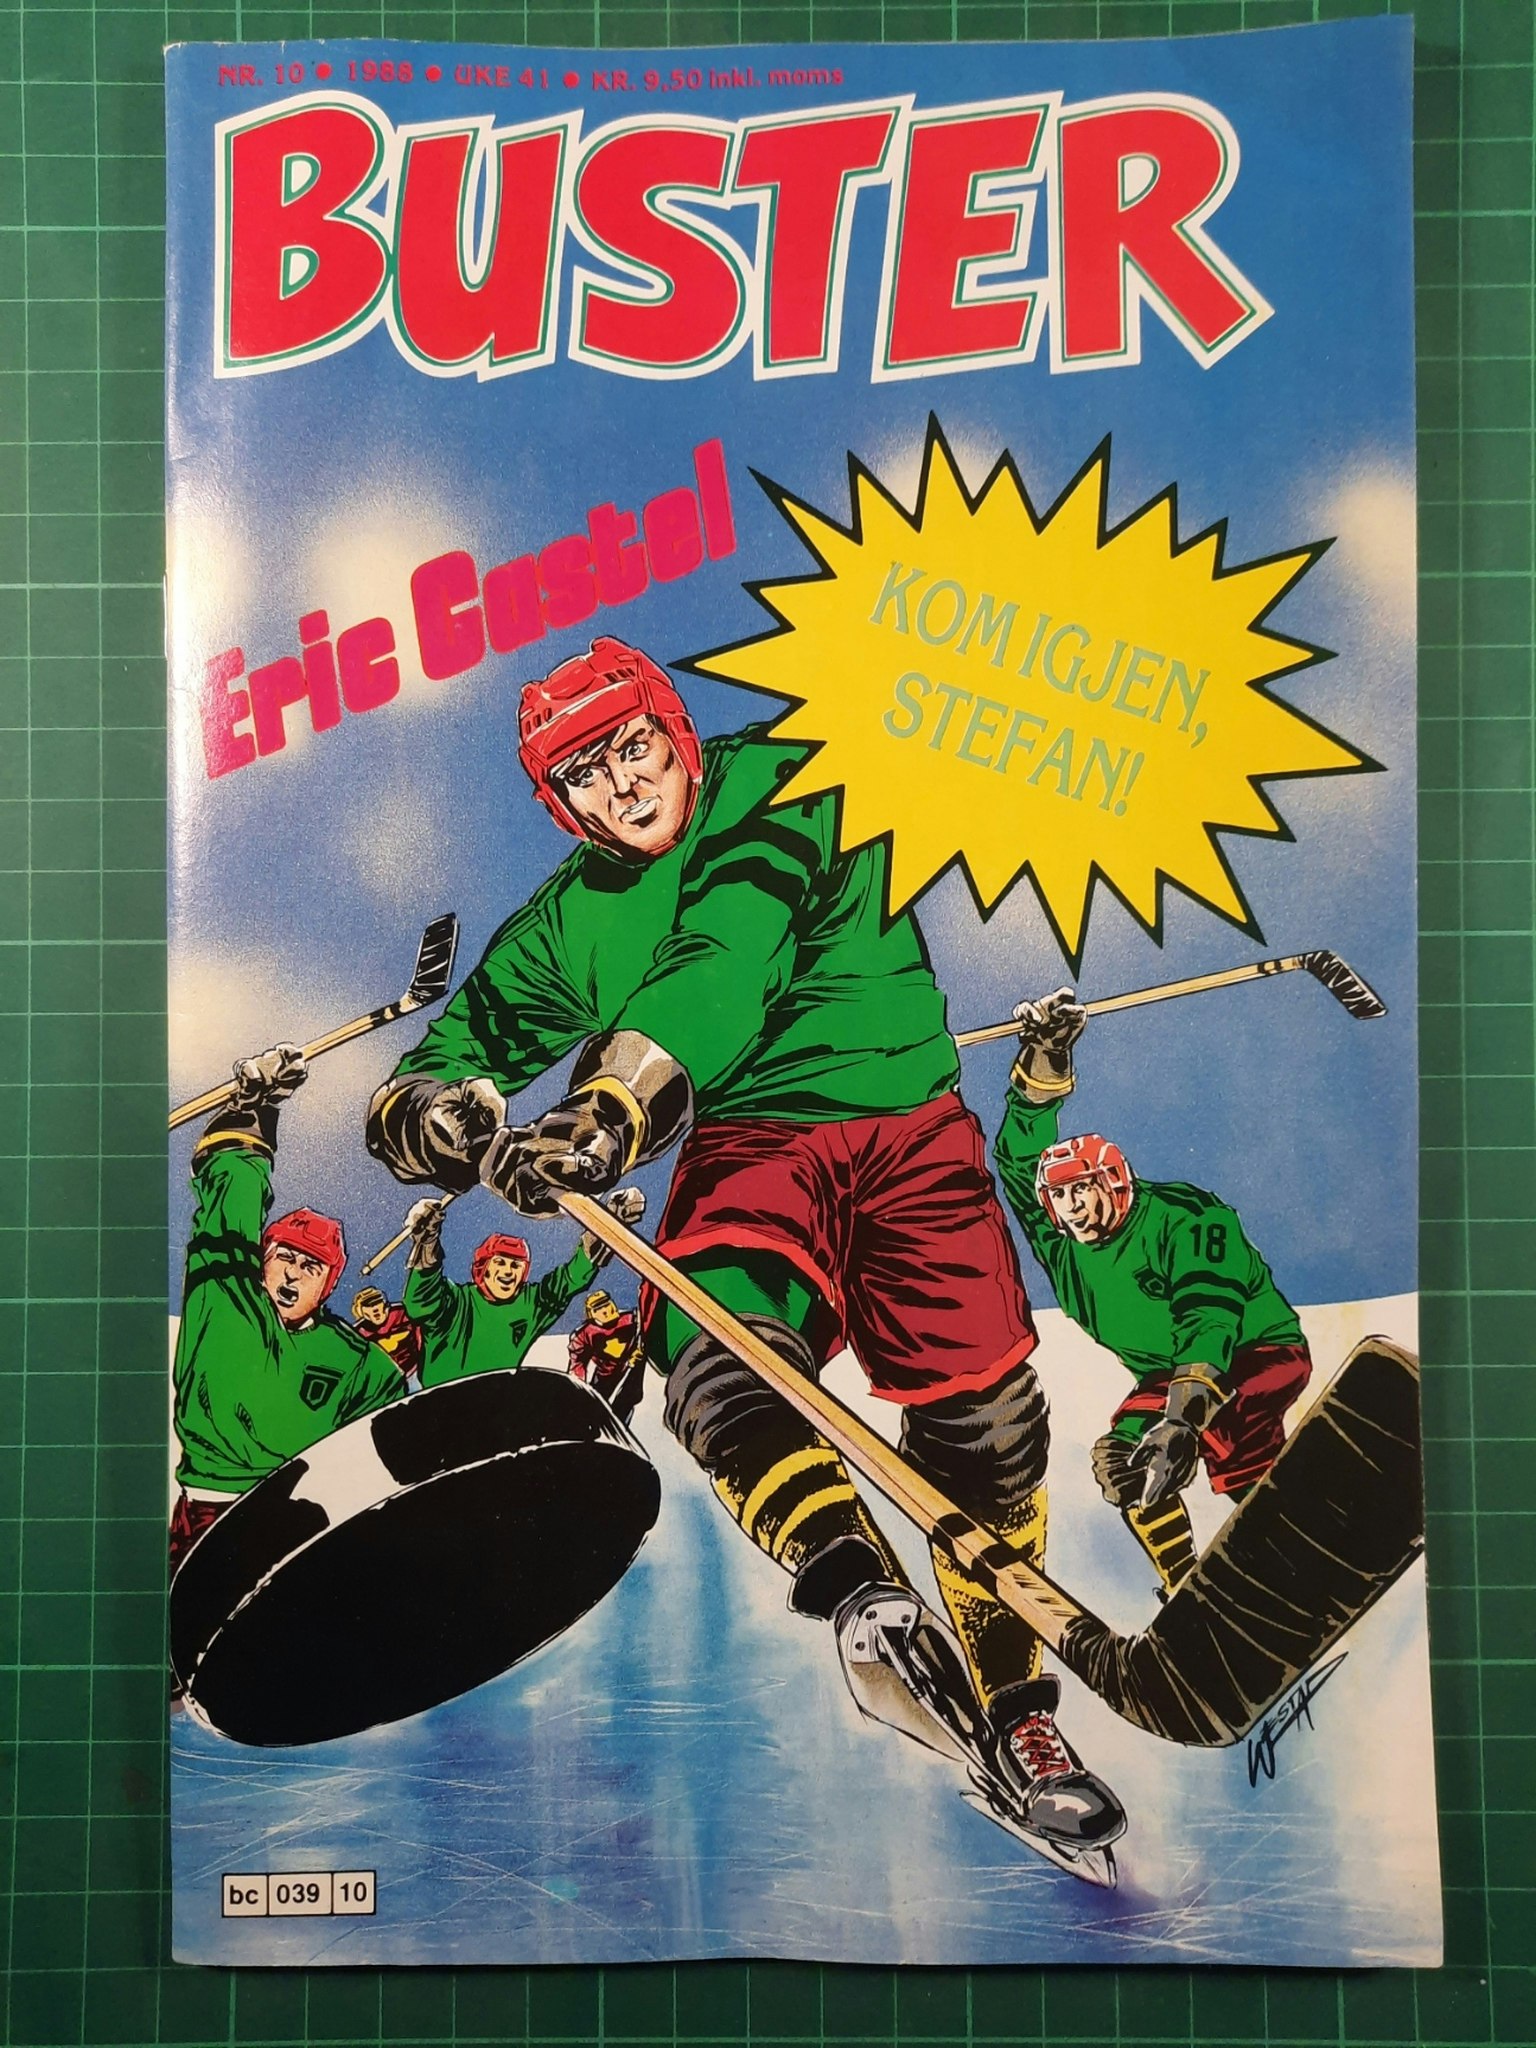 Buster 1988 - 10